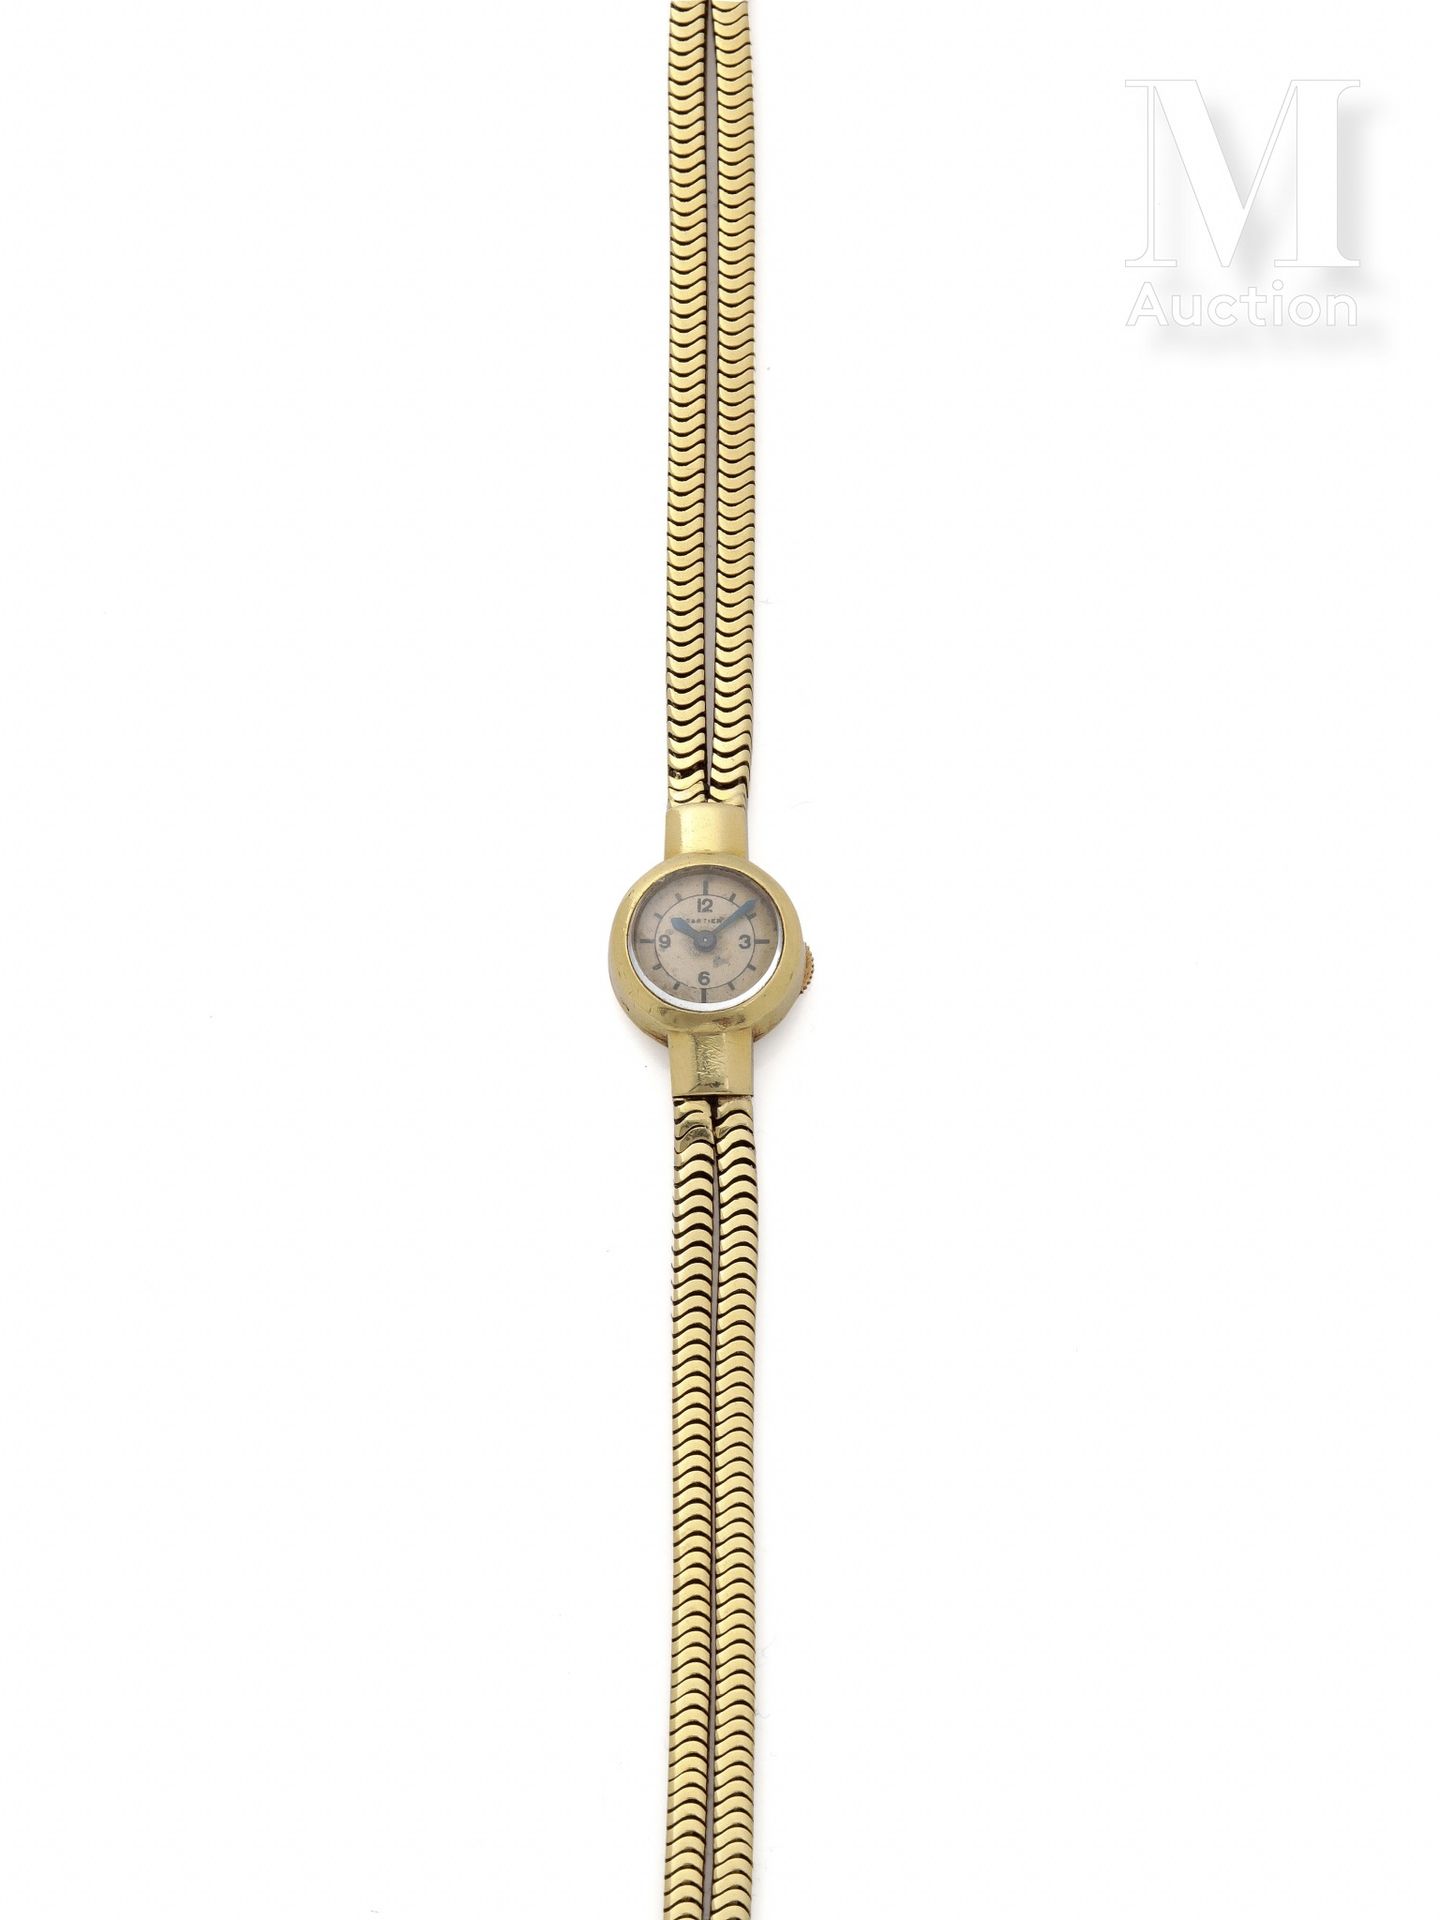 CARTIER Circa 1940

Ladies' watch

18-carat gold case 

Mechanical movement with&hellip;